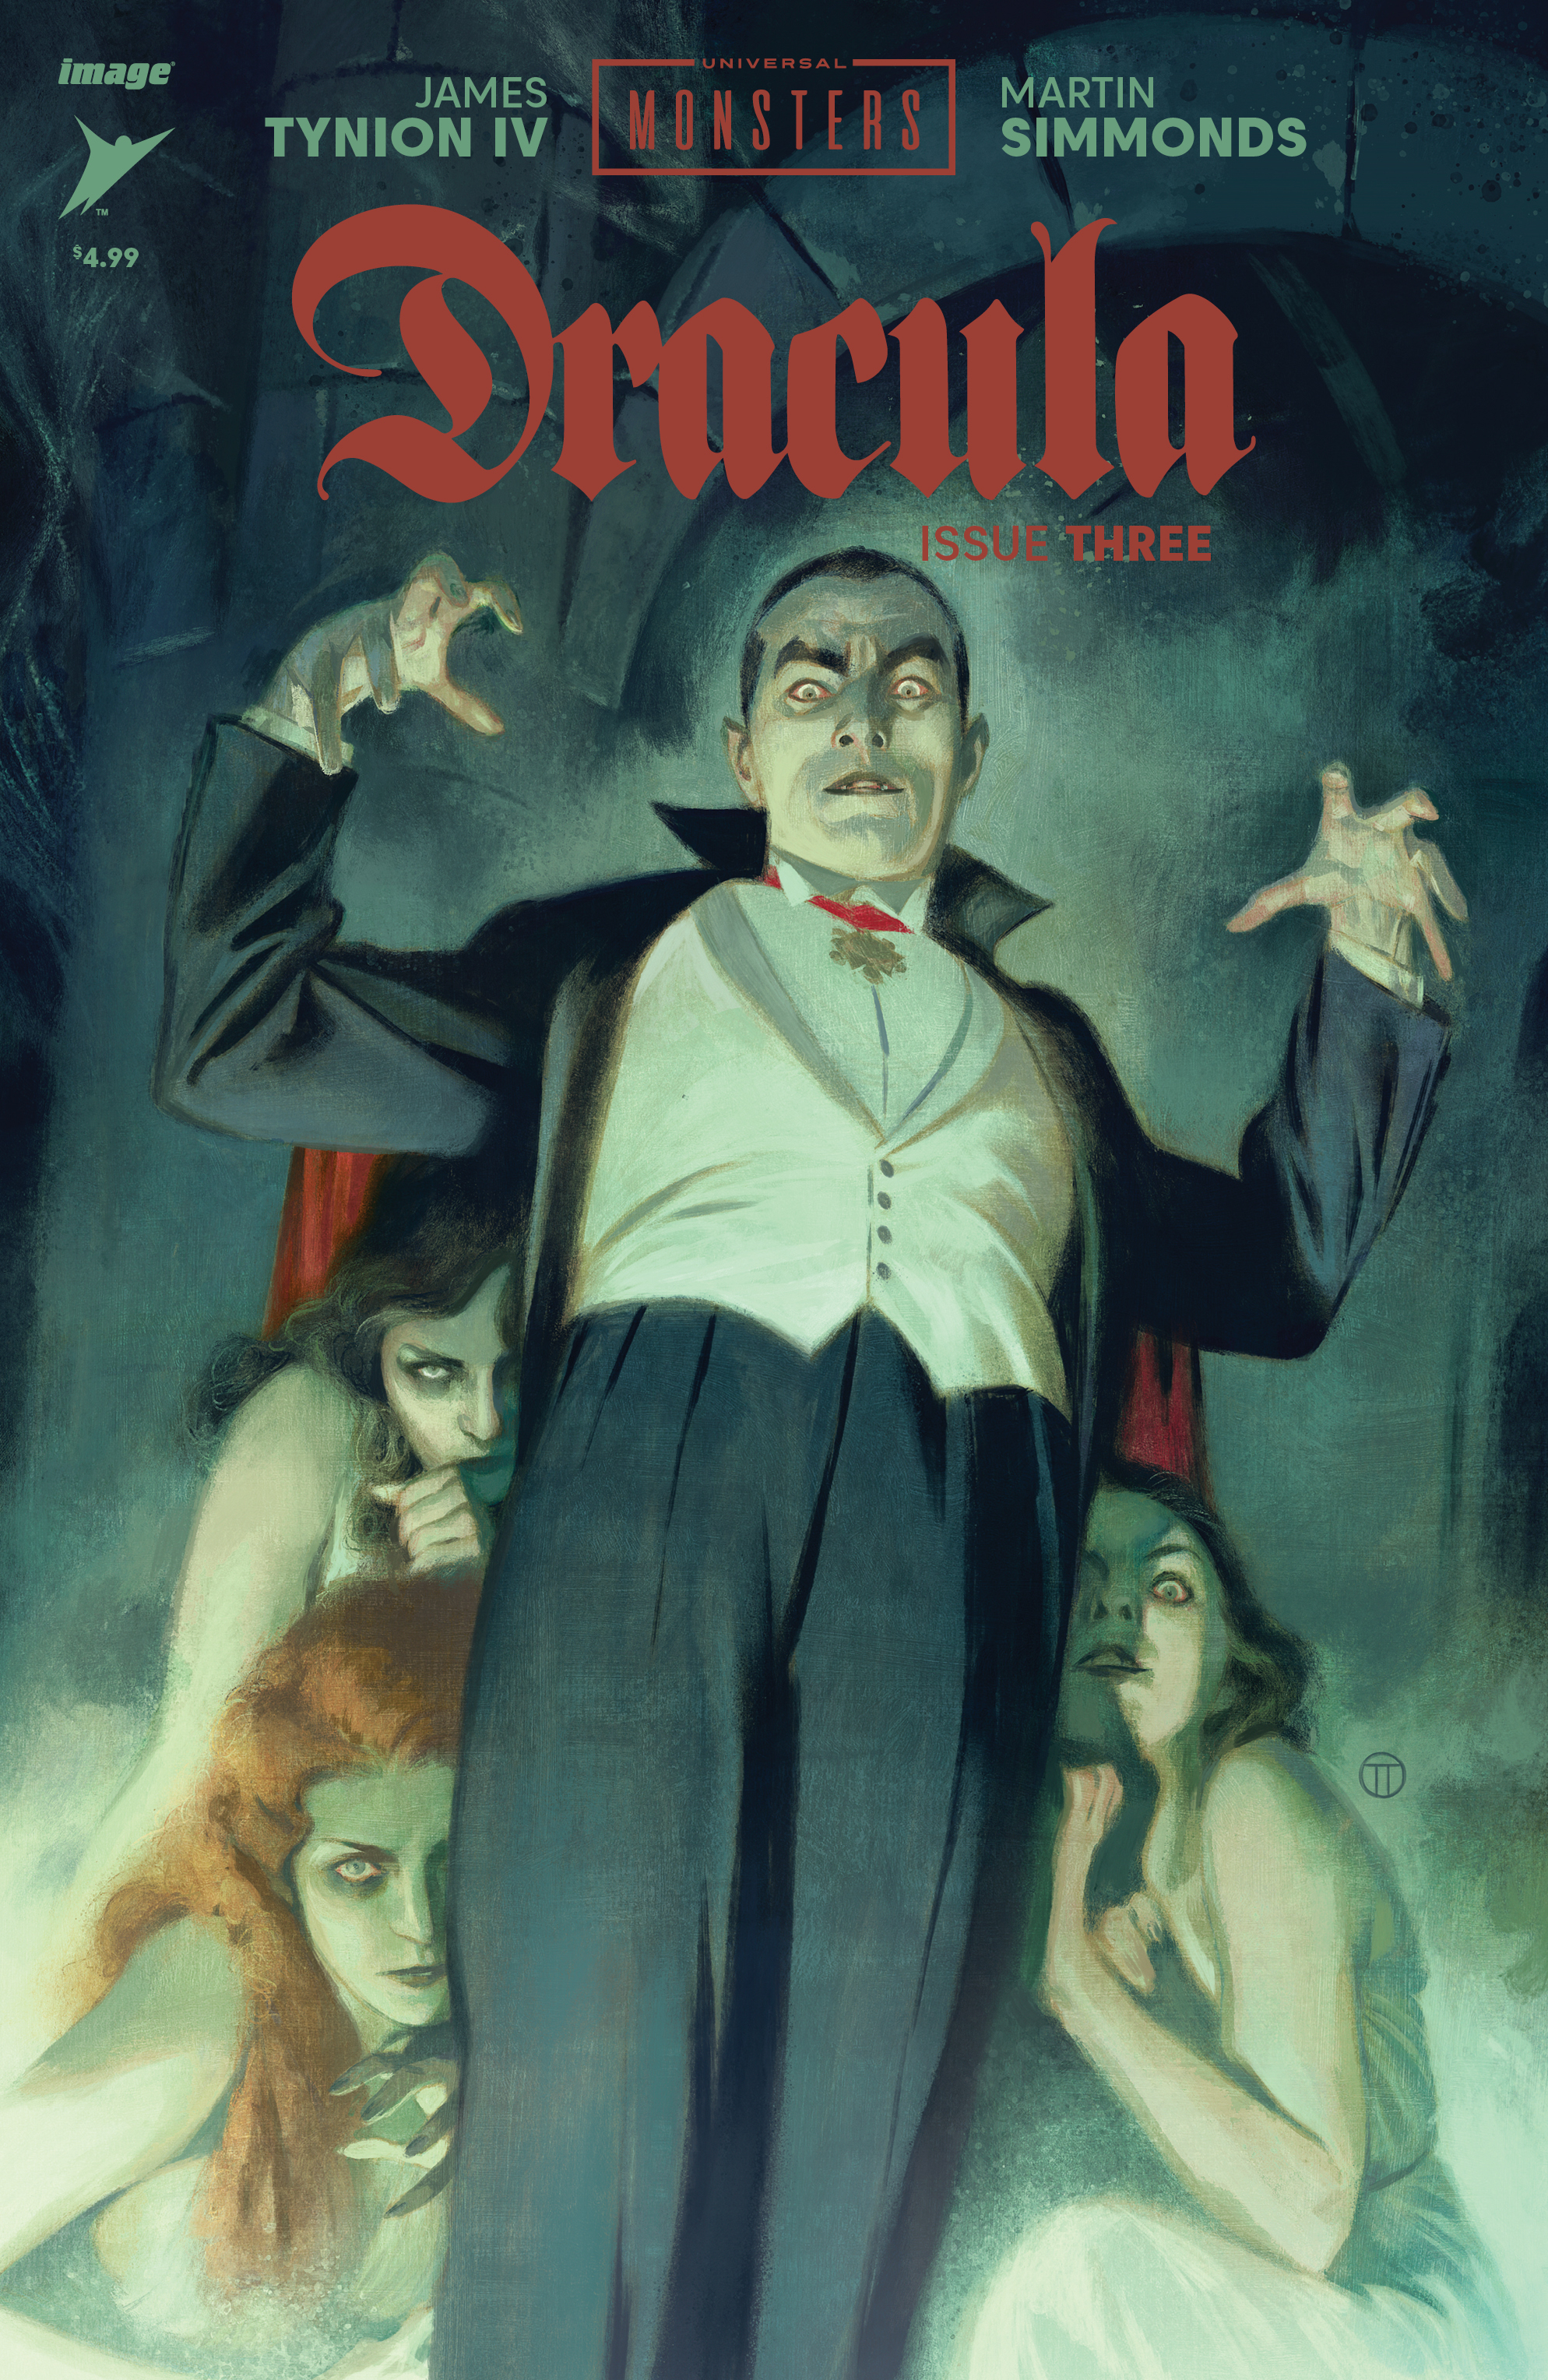 Universal Monsters Dracula #3 Cover B Totino Tedesco Variant (Of 4)